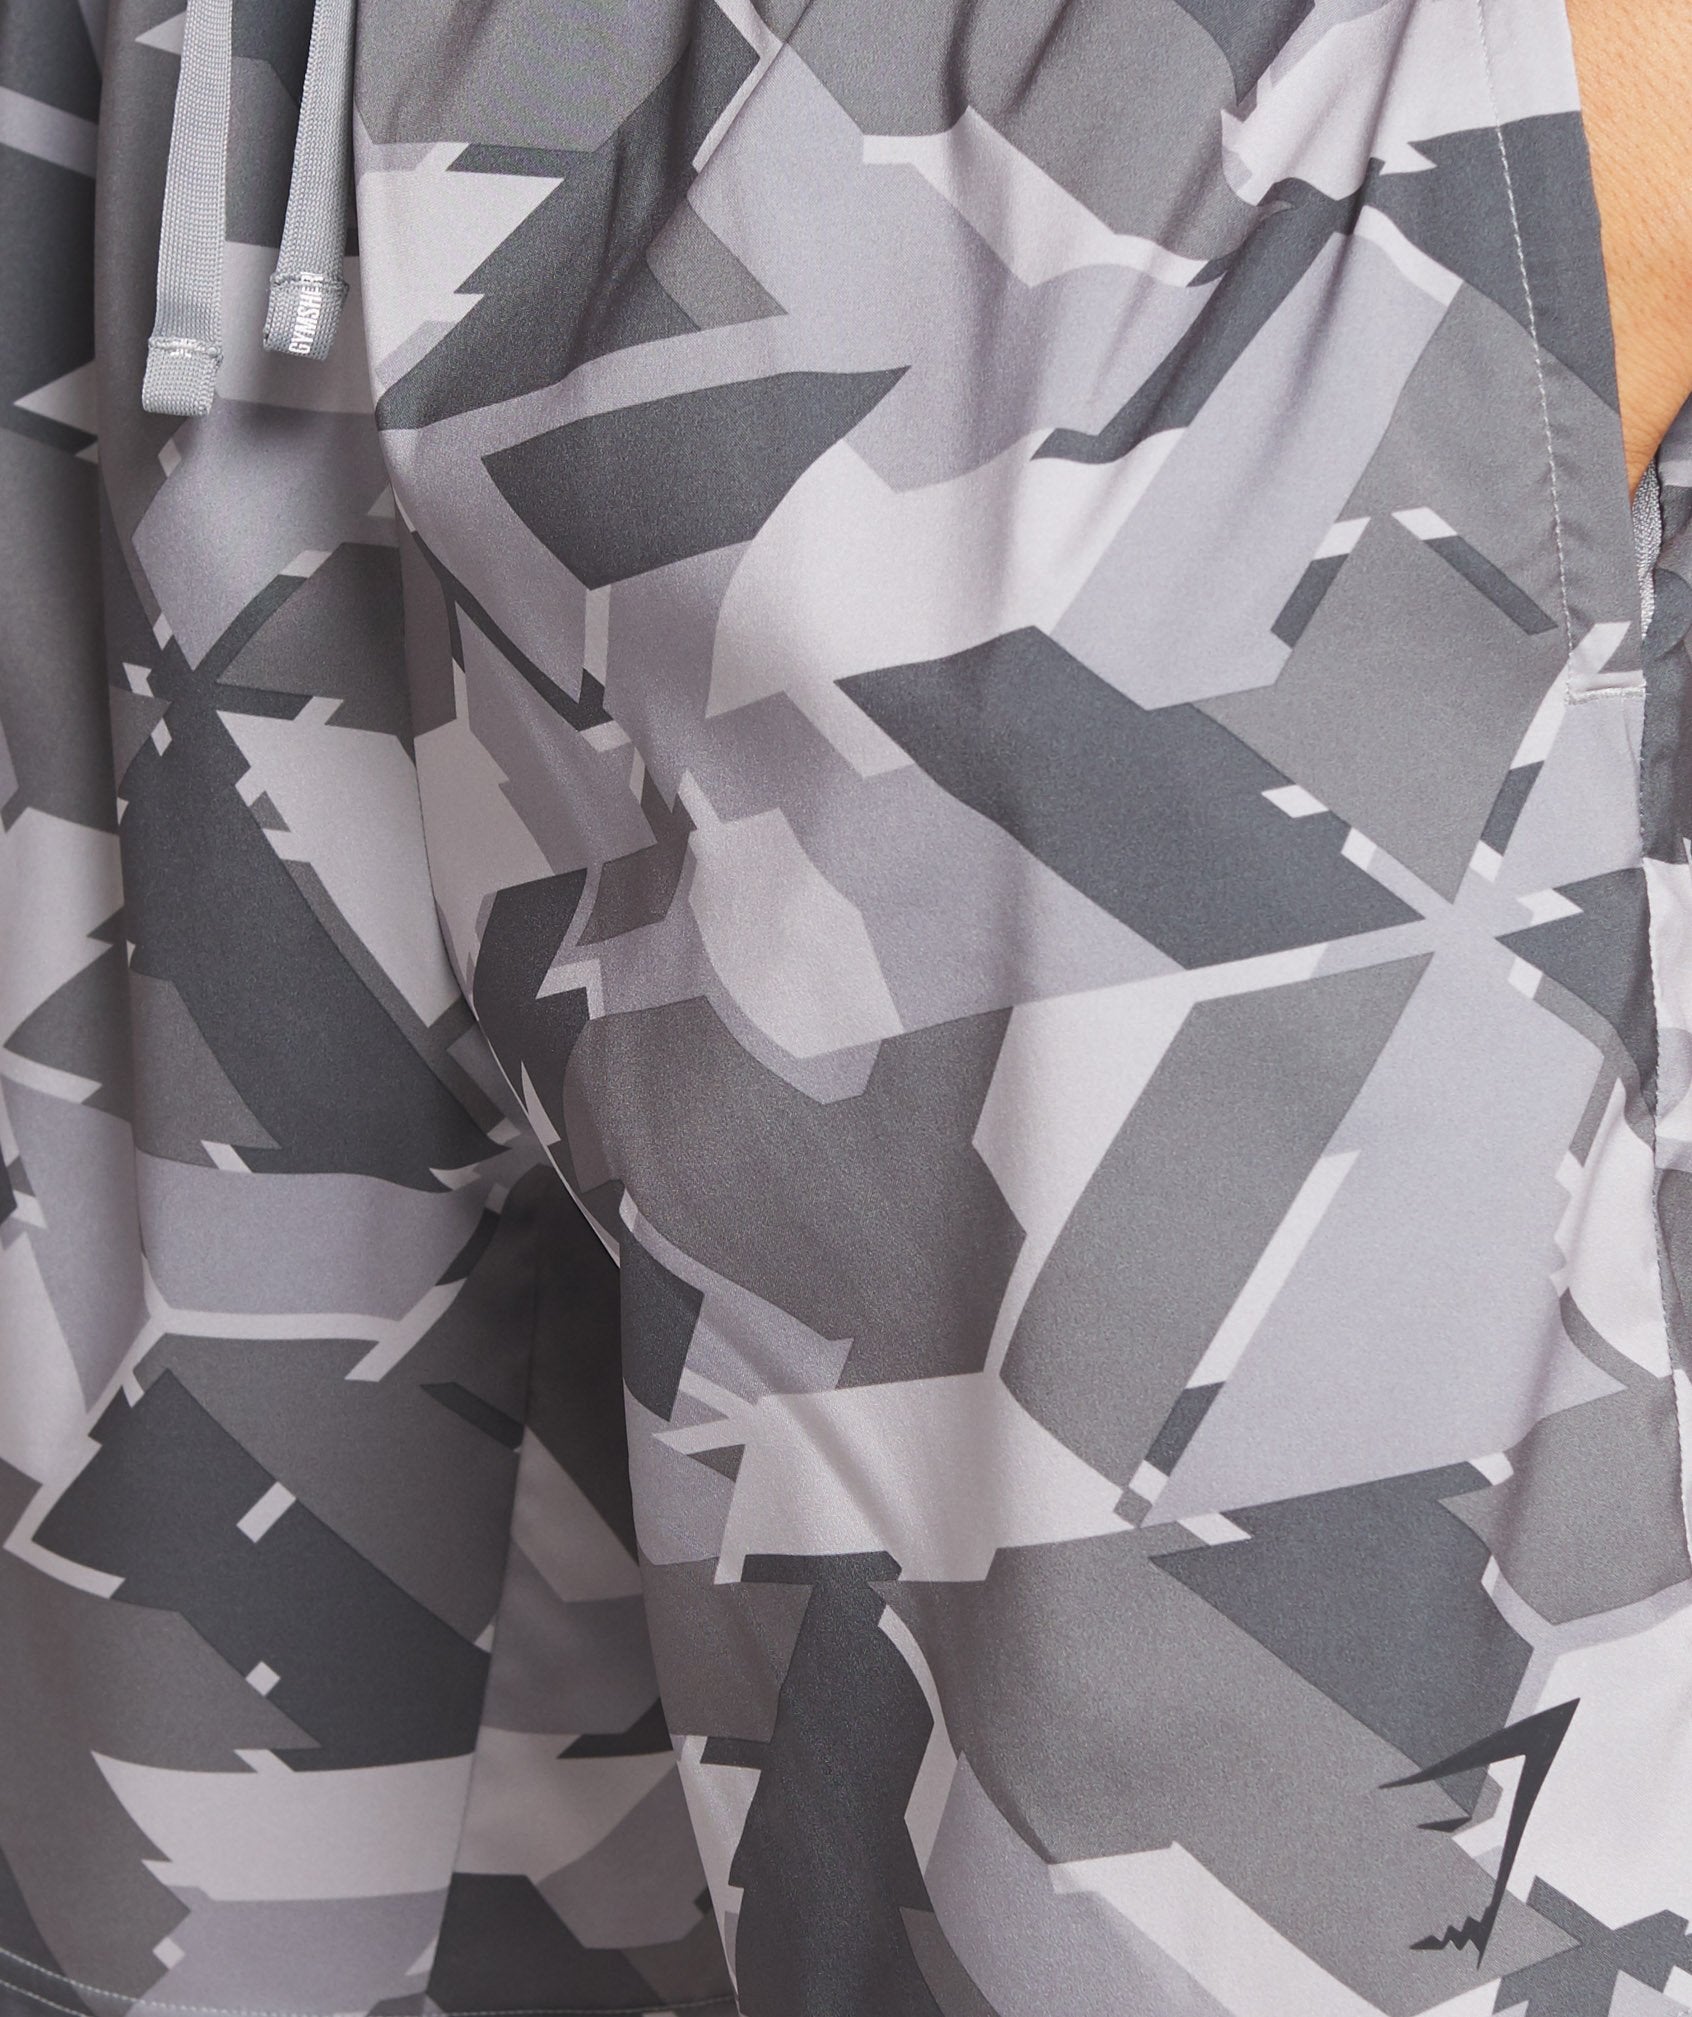 Arrival Zip Pocket Shorts in Camo - view 7